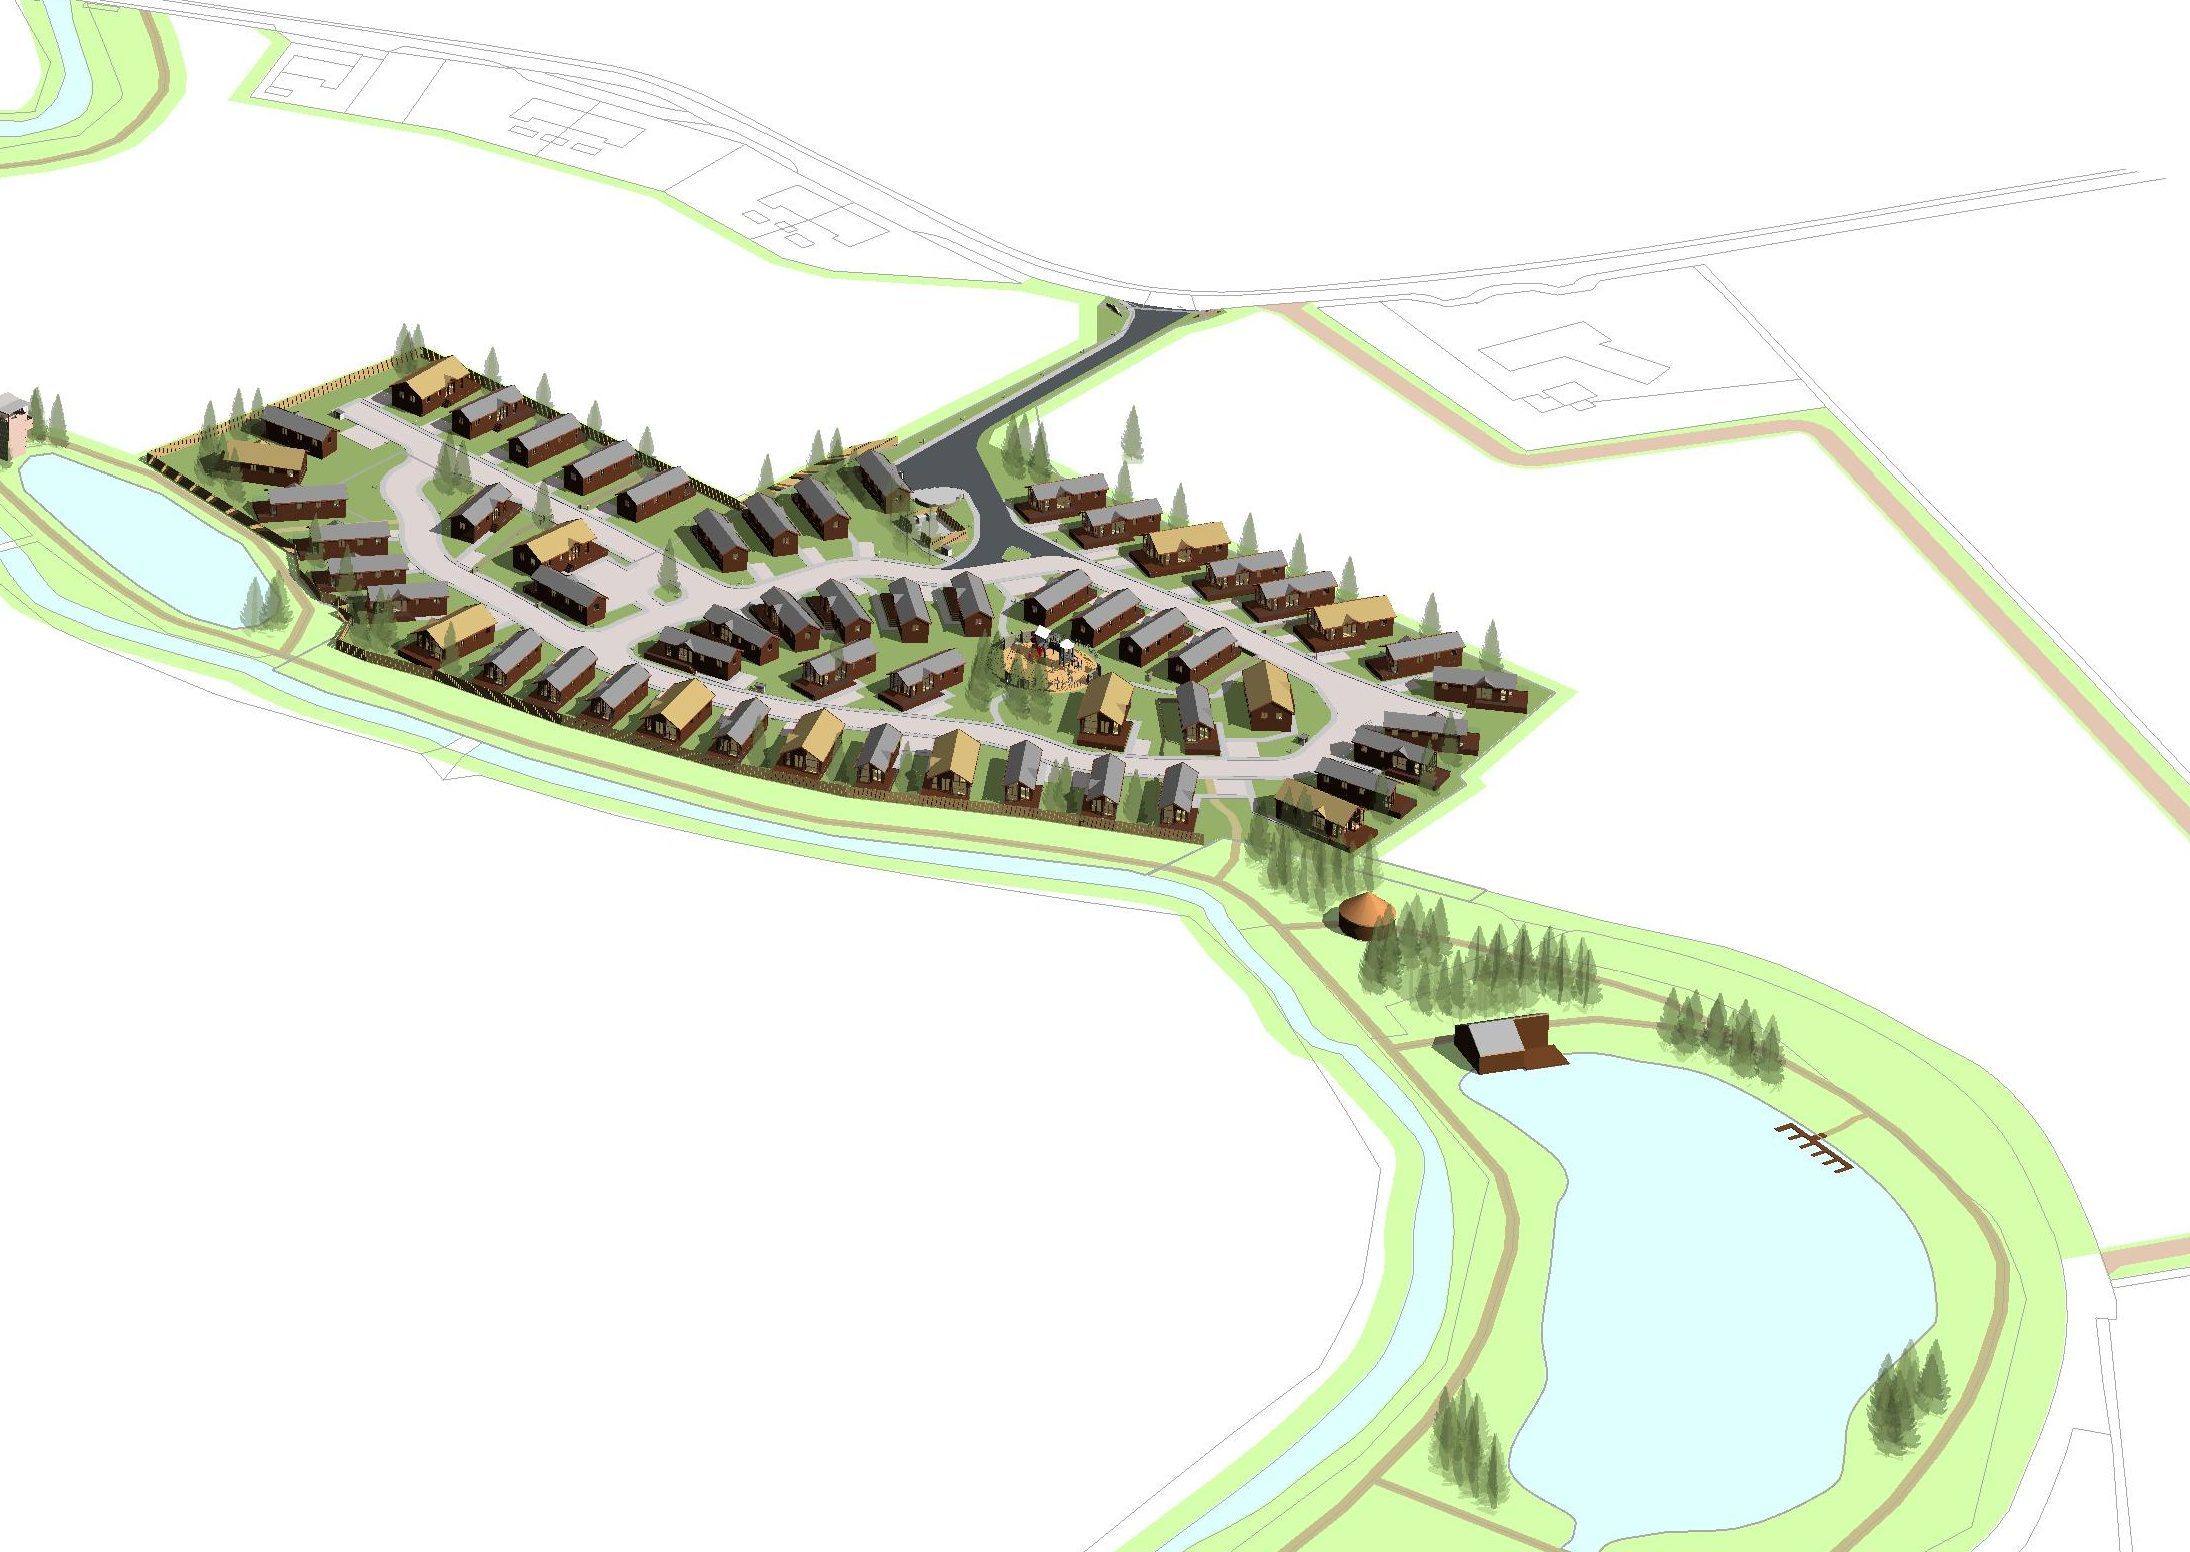 The proposed holiday village for Dowrieburn, Fettercairn